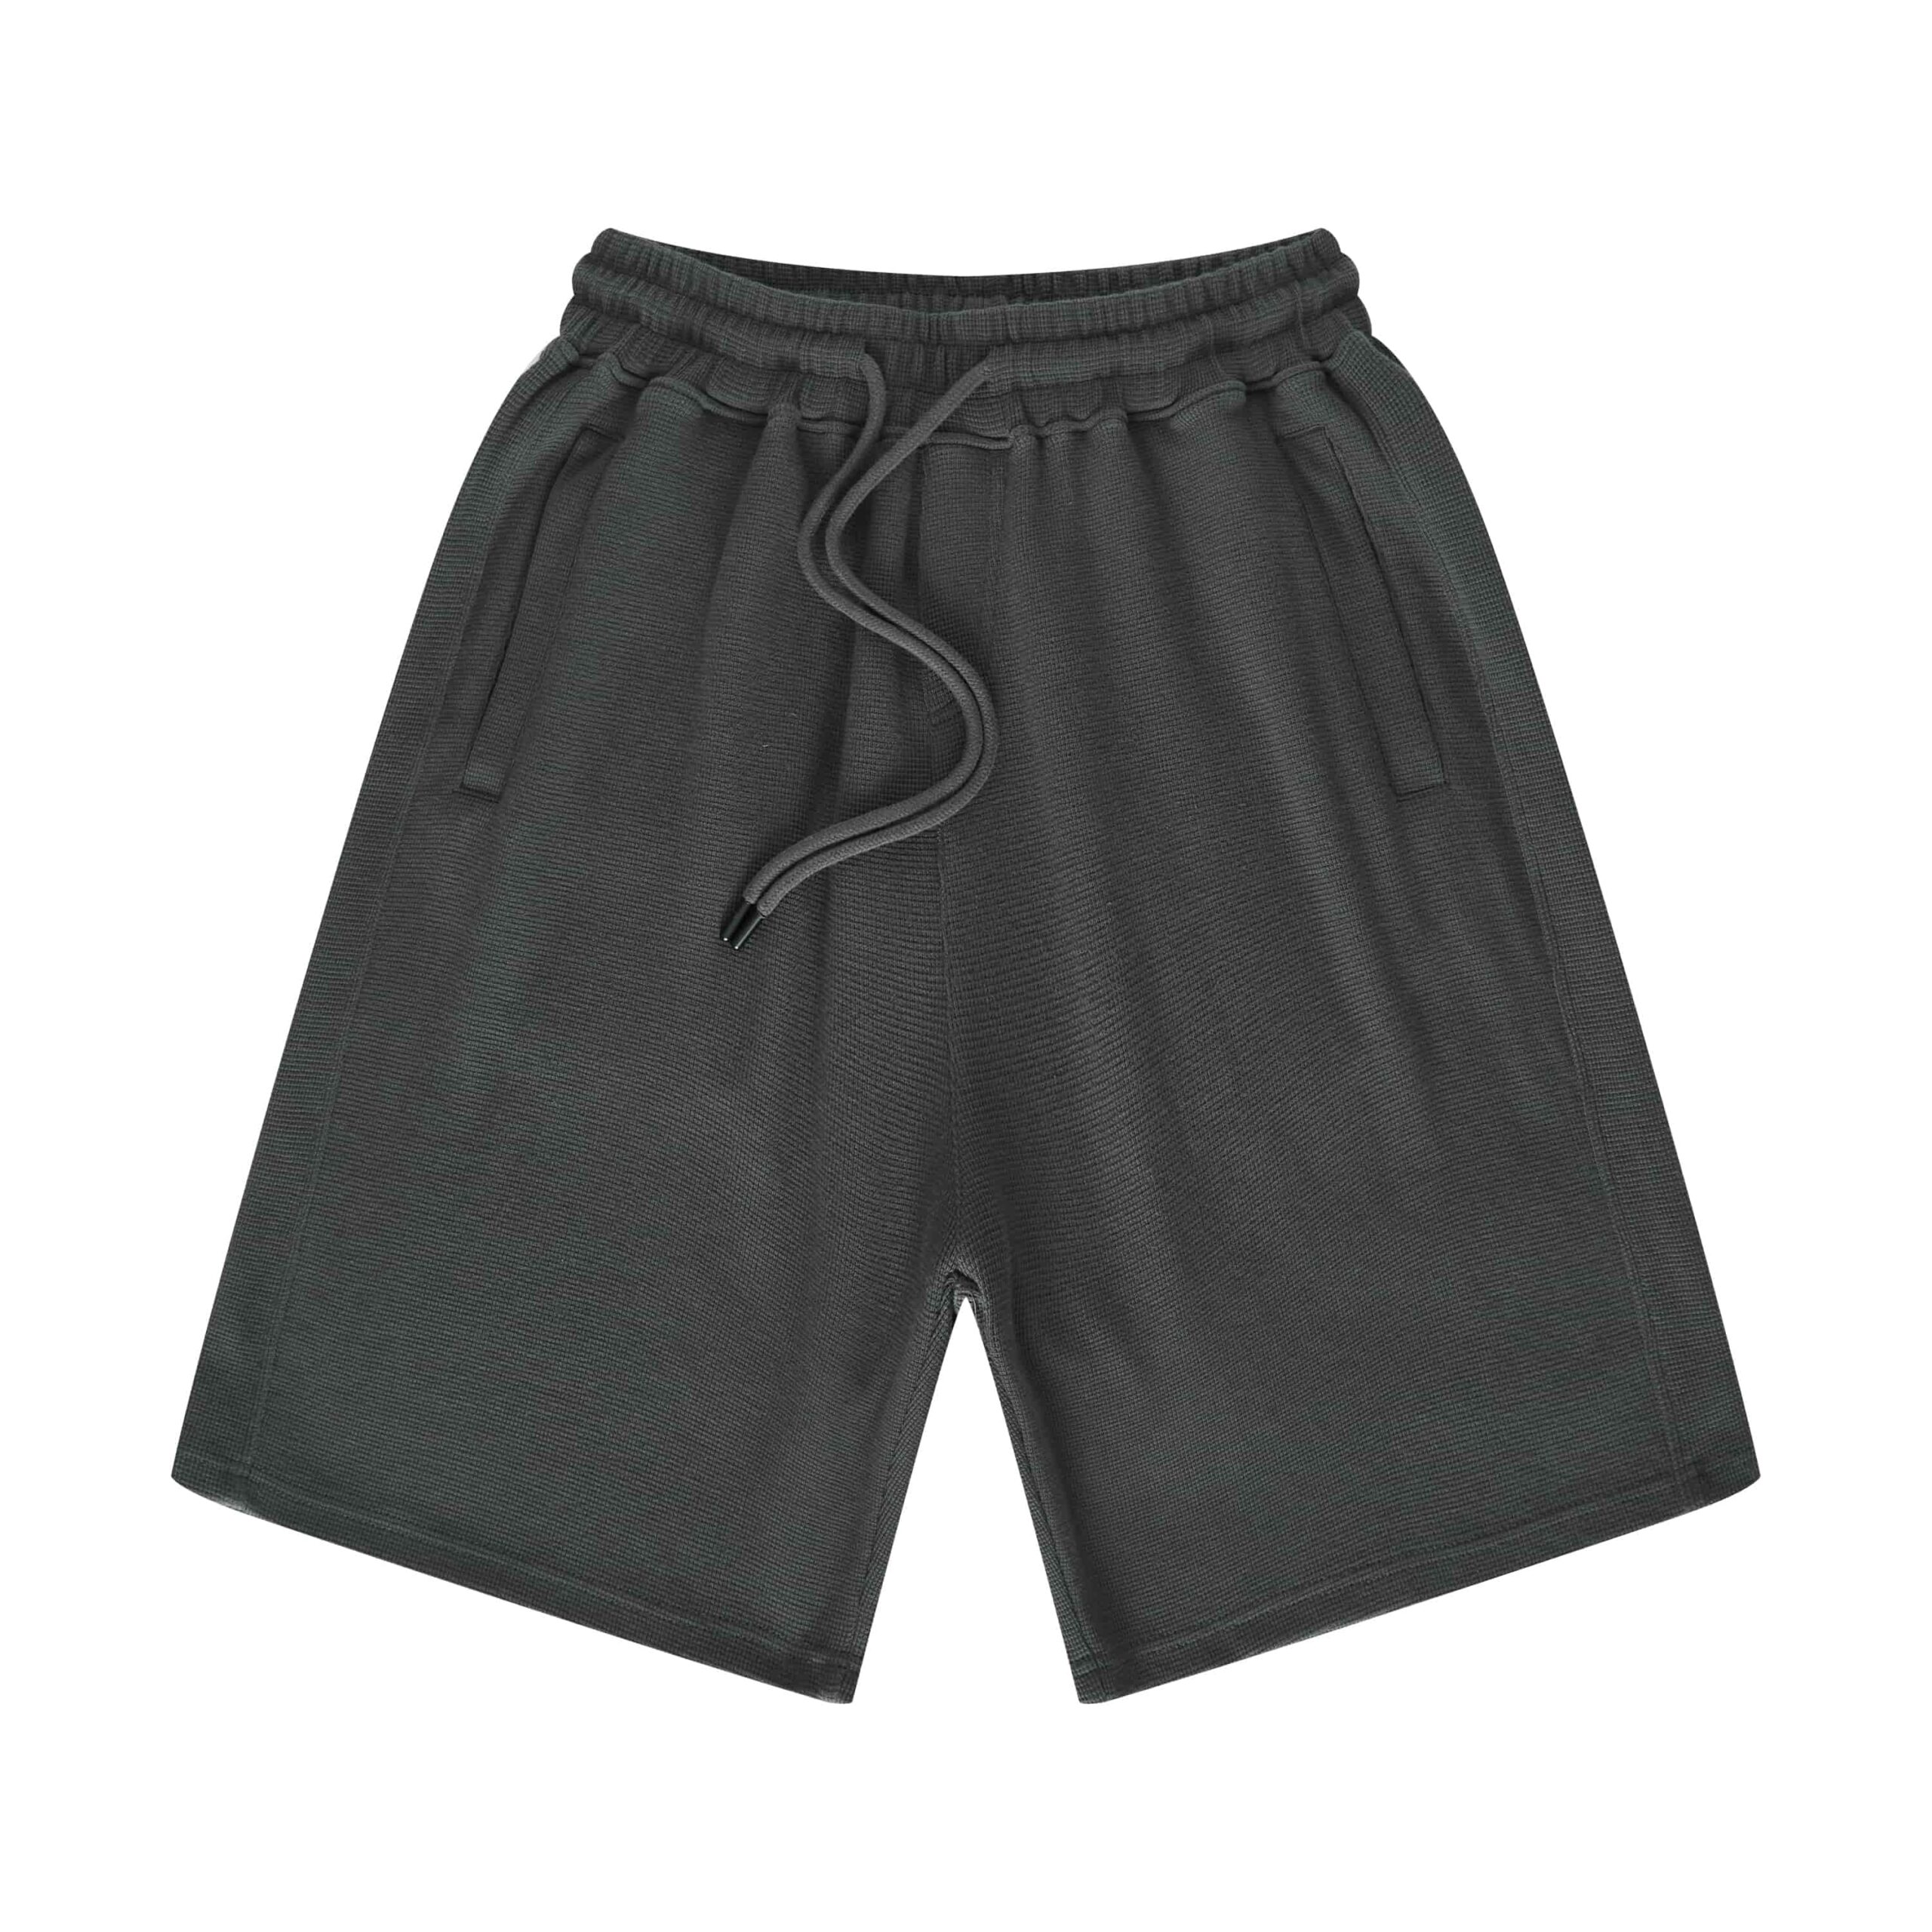 Waffle Pattern Shorts S3038-carbon grey front